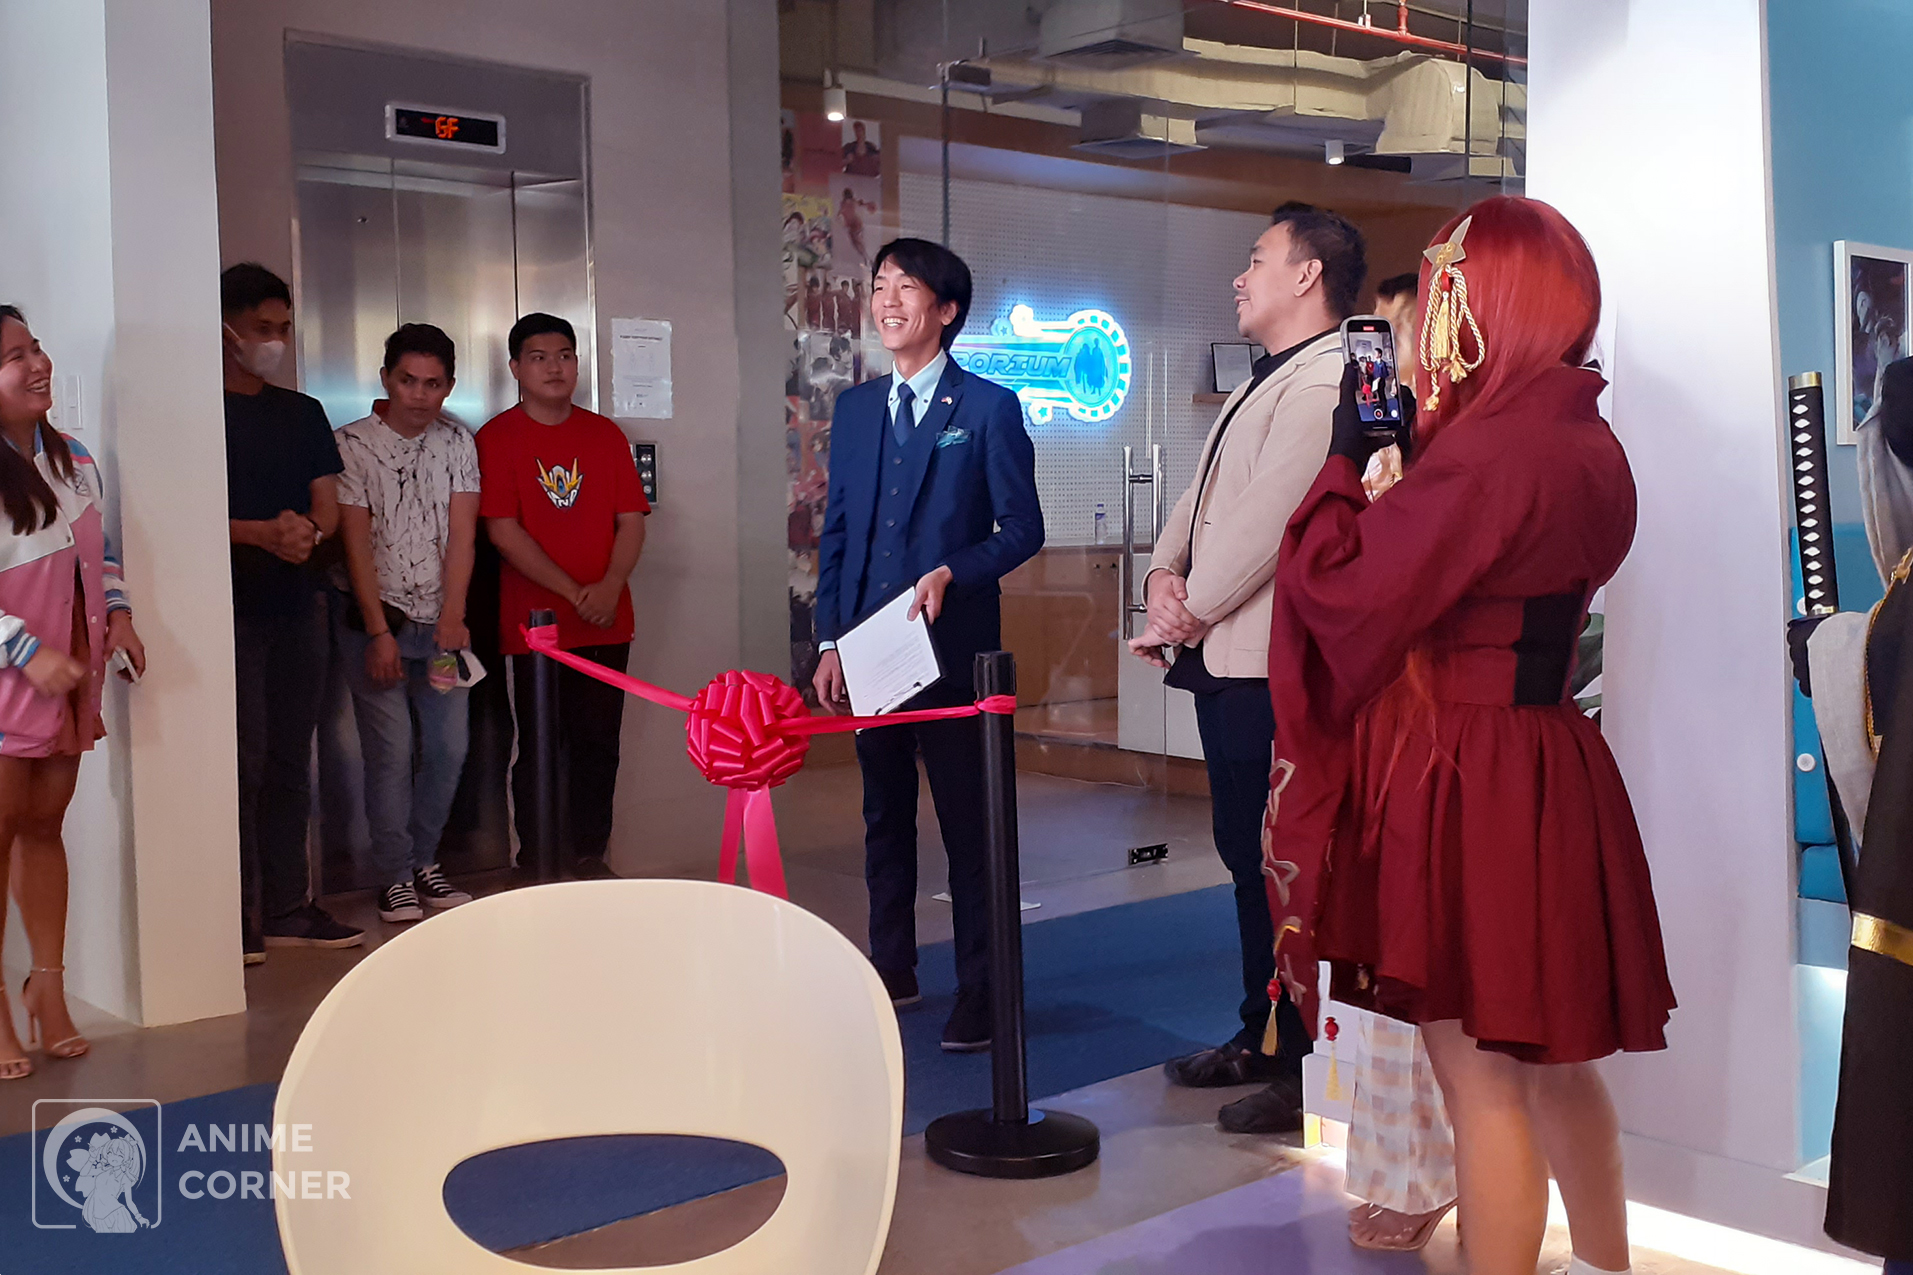 Aniporium Showroom Opening with Mr. Aoi Ikeda